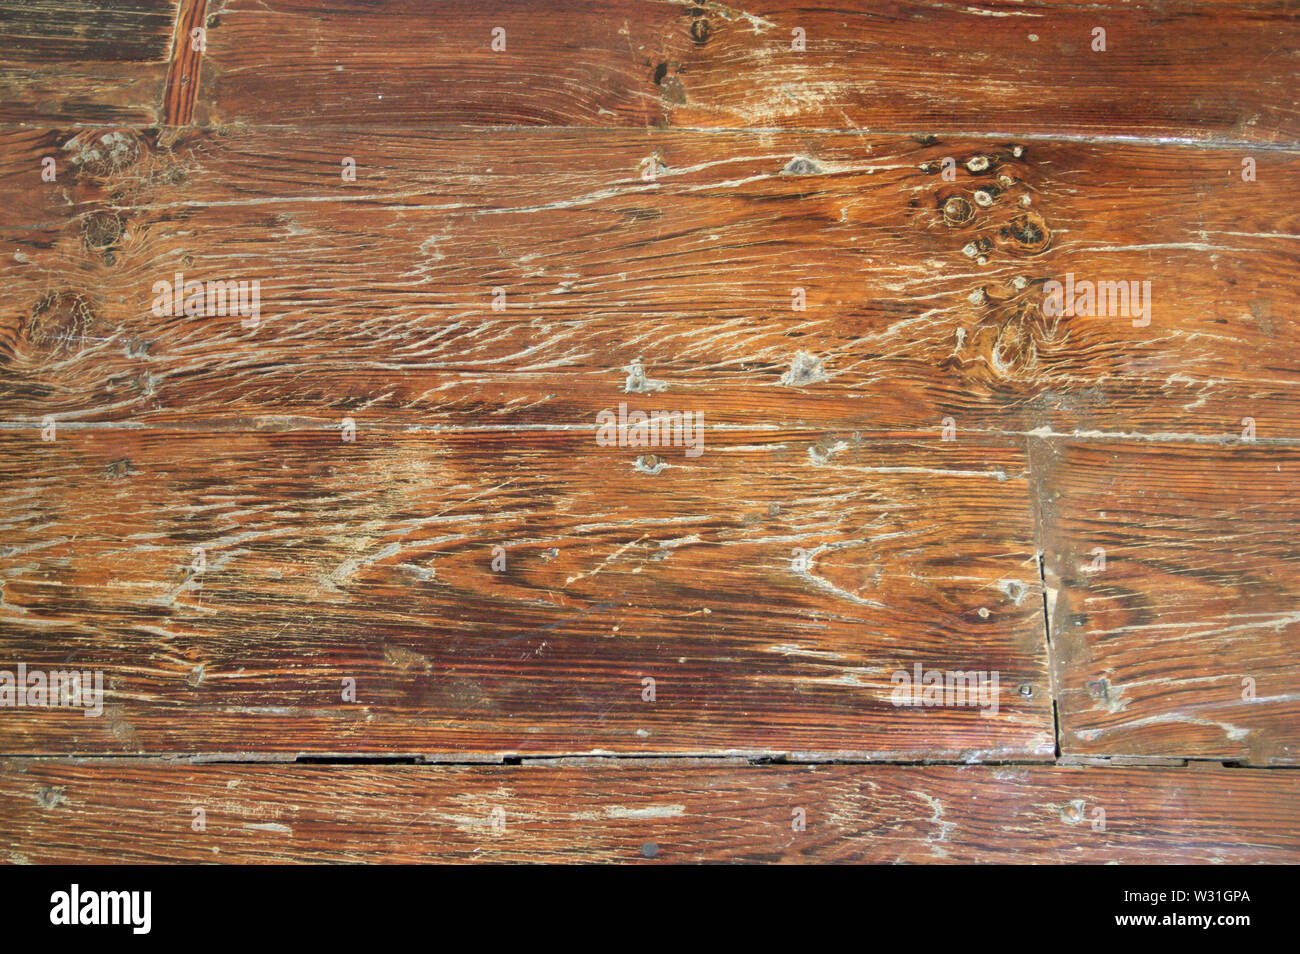 Close Up Of An Old And Used Wooden Floor With Cracks And With Some